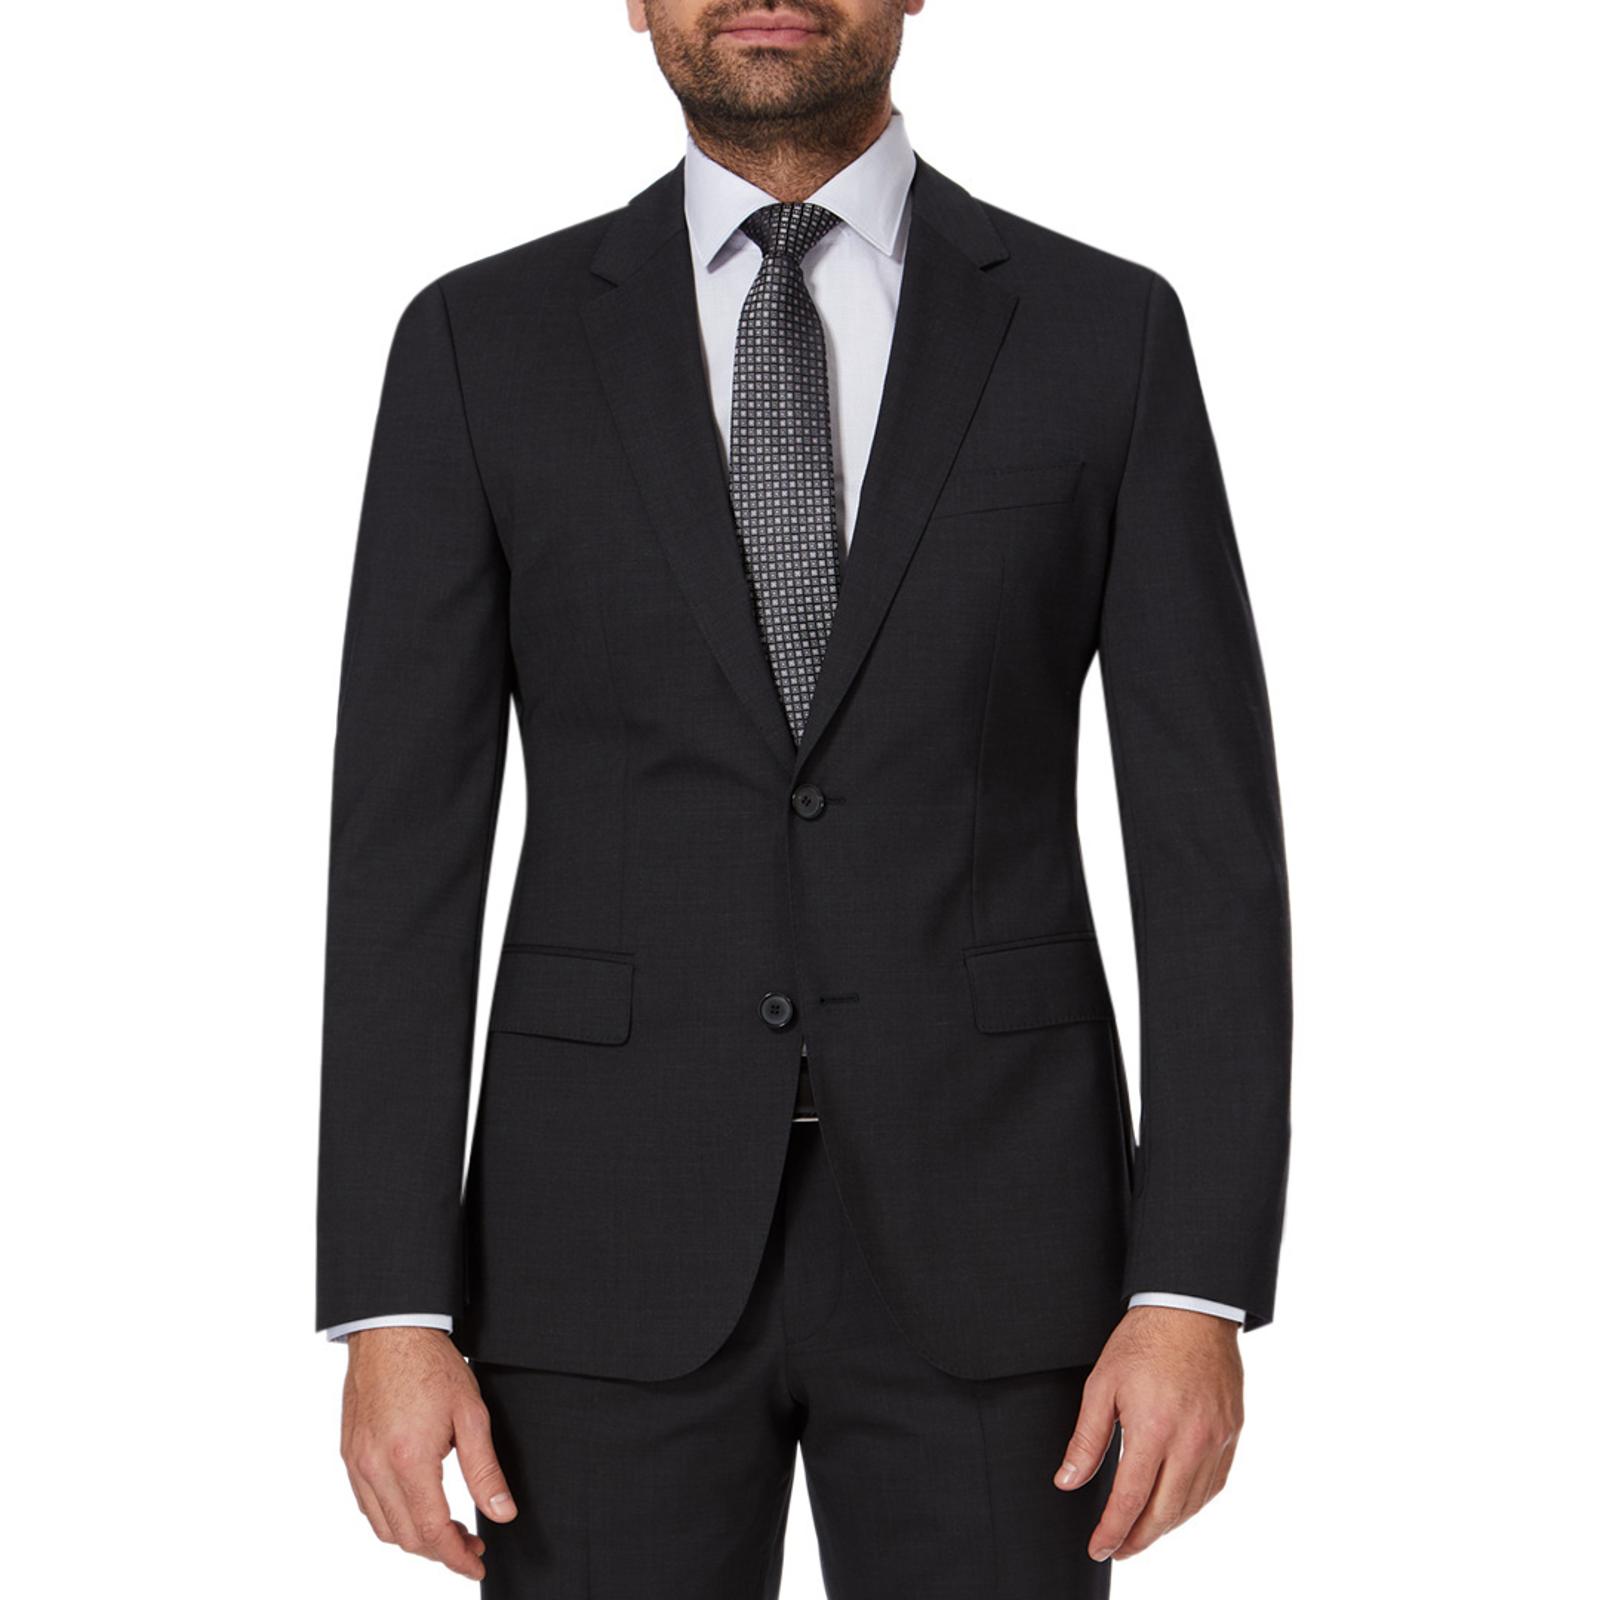 Charcoal Rider Stretch Wool Jacket - BrandAlley